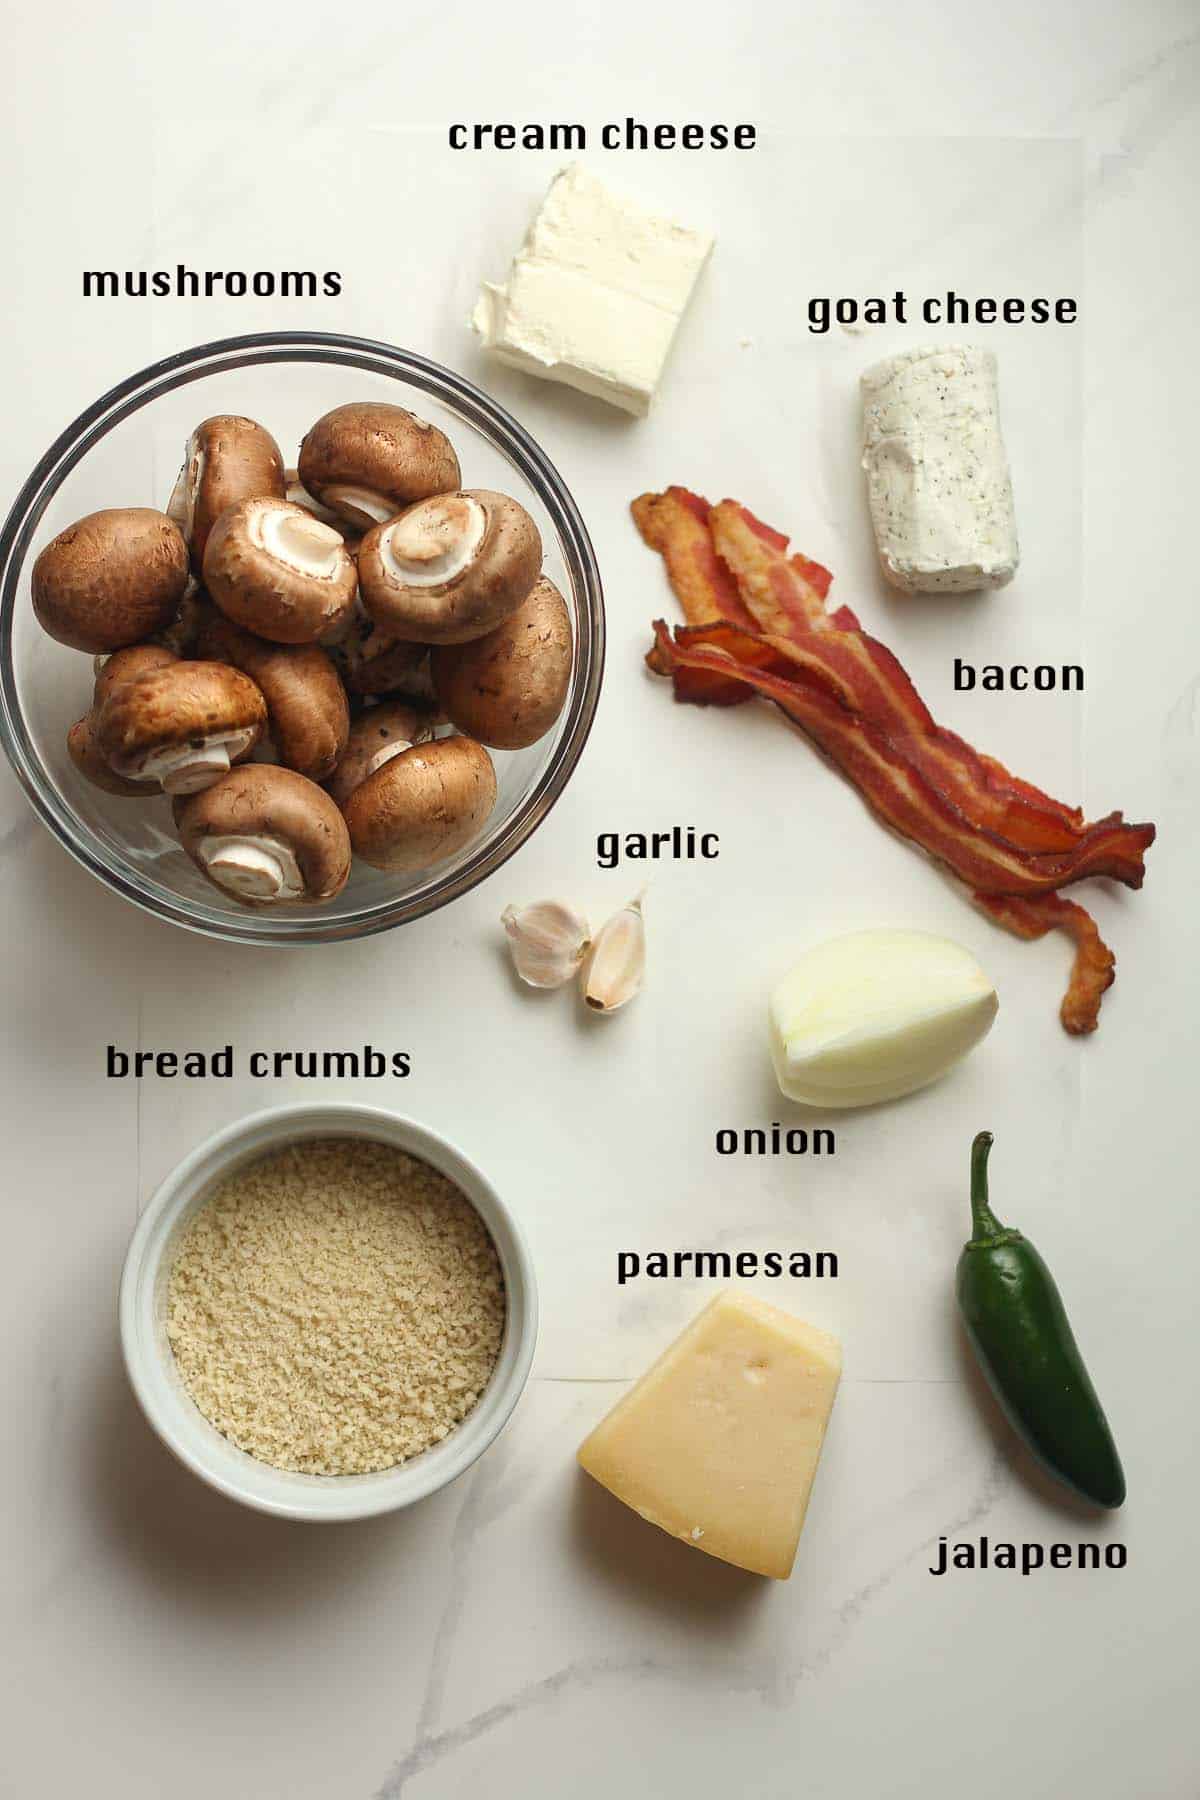 The ingredients, labeled.